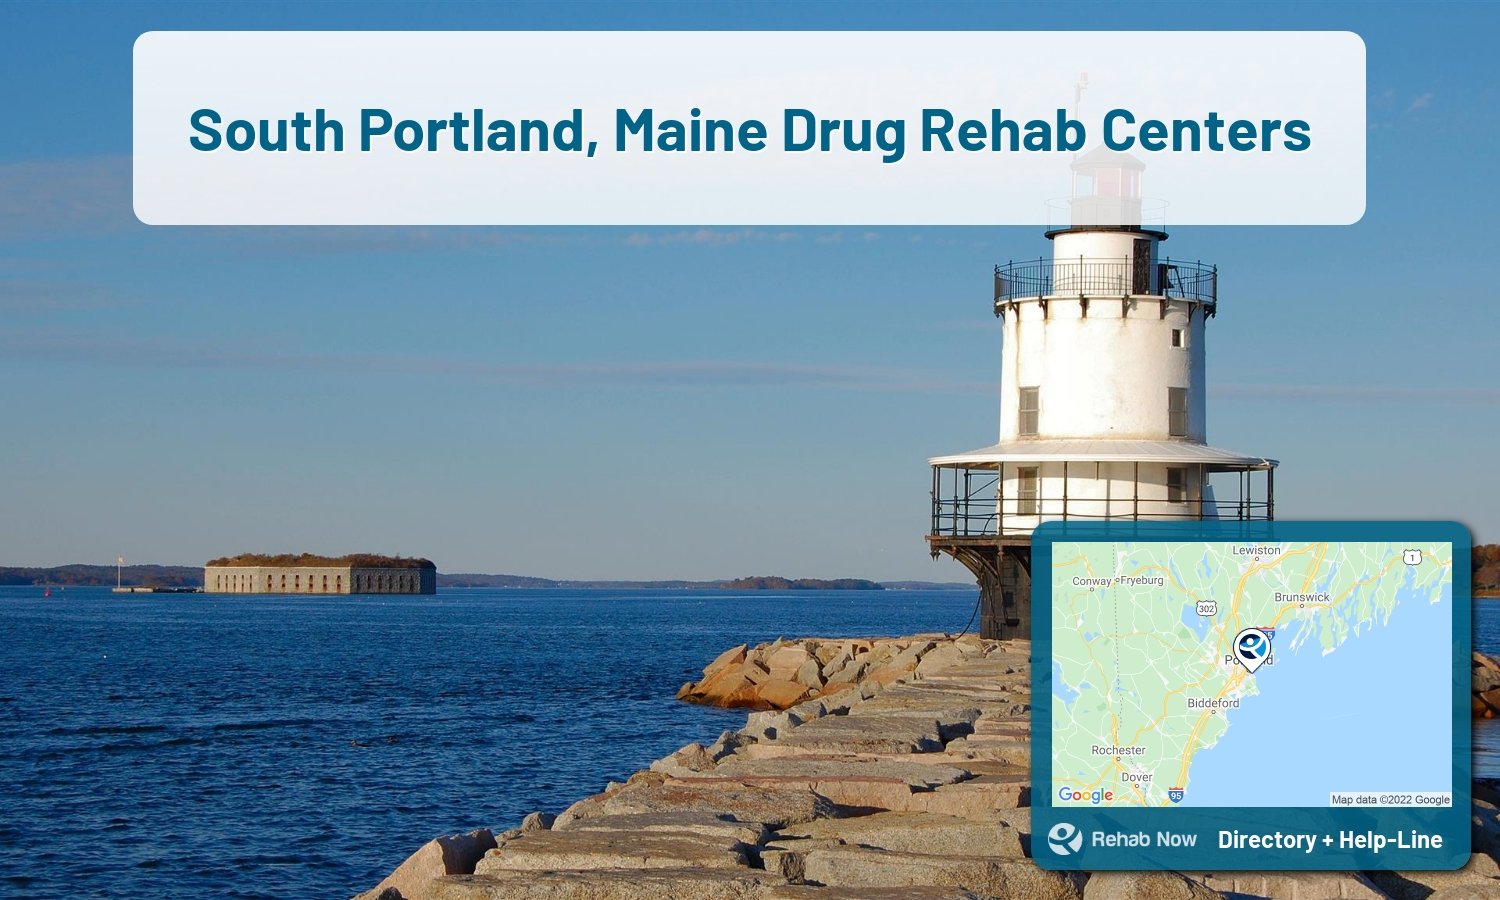 South Portland, ME Treatment Centers. Find drug rehab in South Portland, Maine, or detox and treatment programs. Get the right help now!